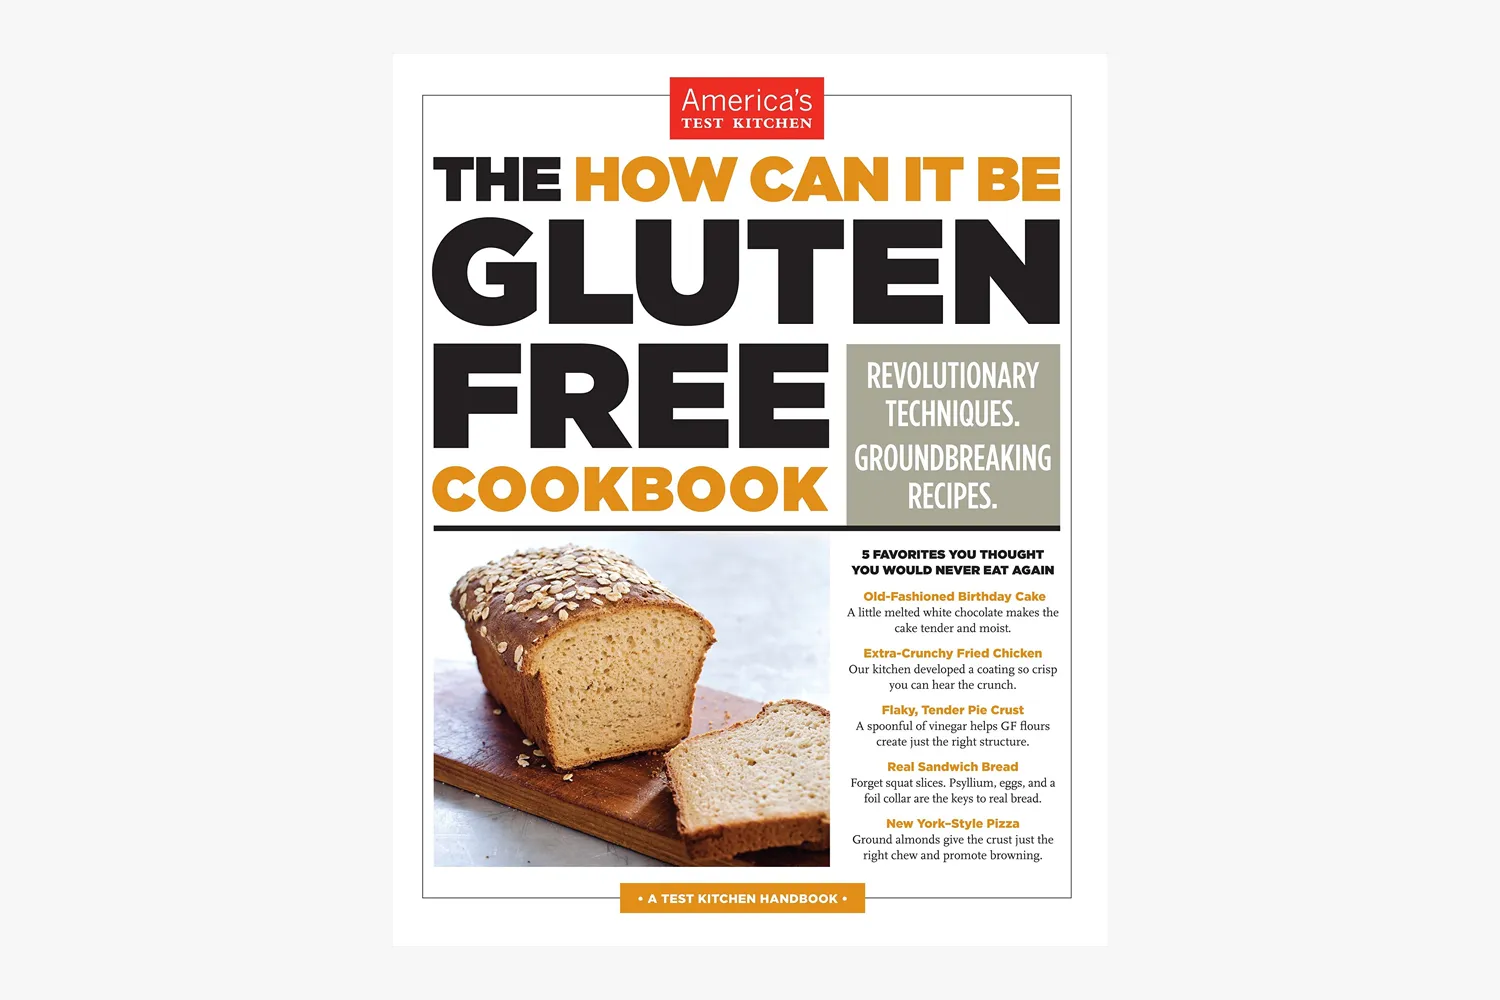 The How Can It Be Gluten-Free Cookbook Book Cover